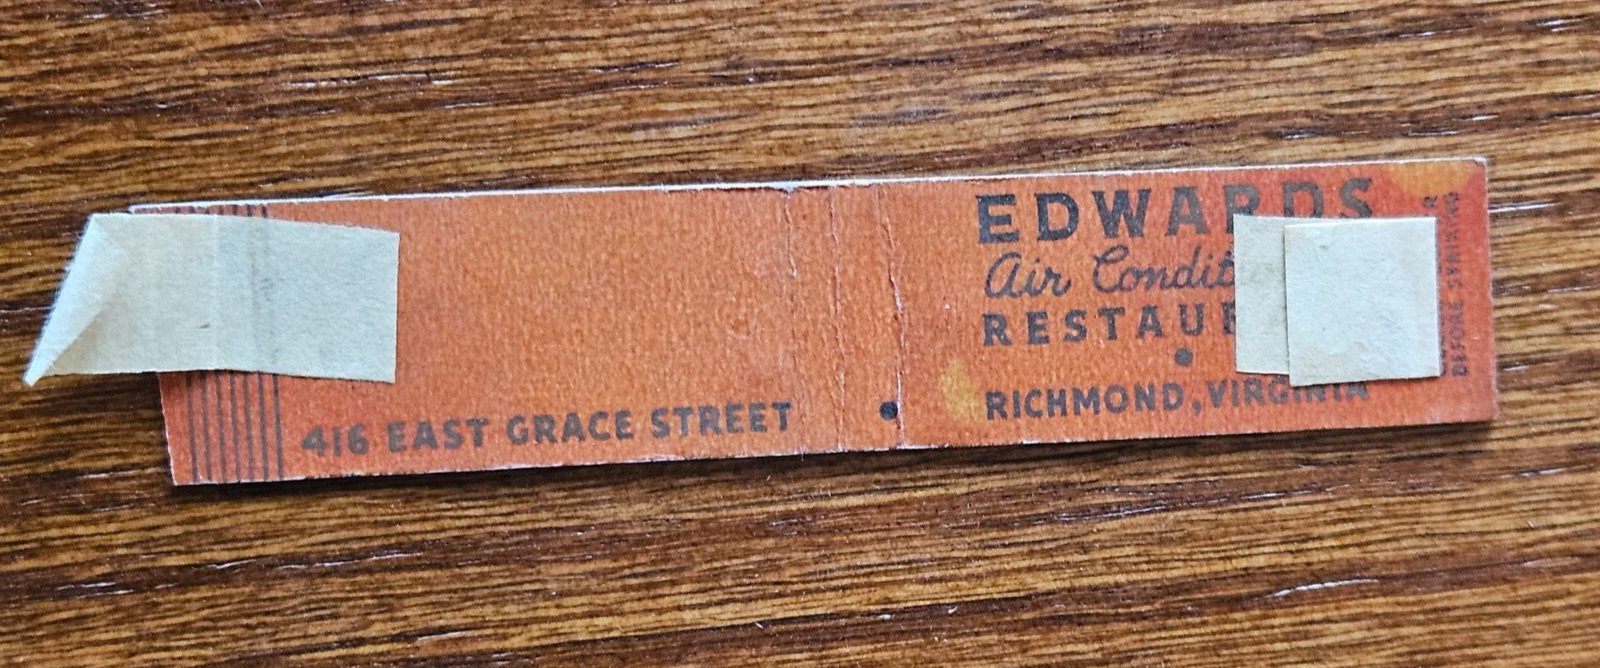 Vintage Matchbook Cover Edwards Air Conditioned Restaurant Richmond Virginia